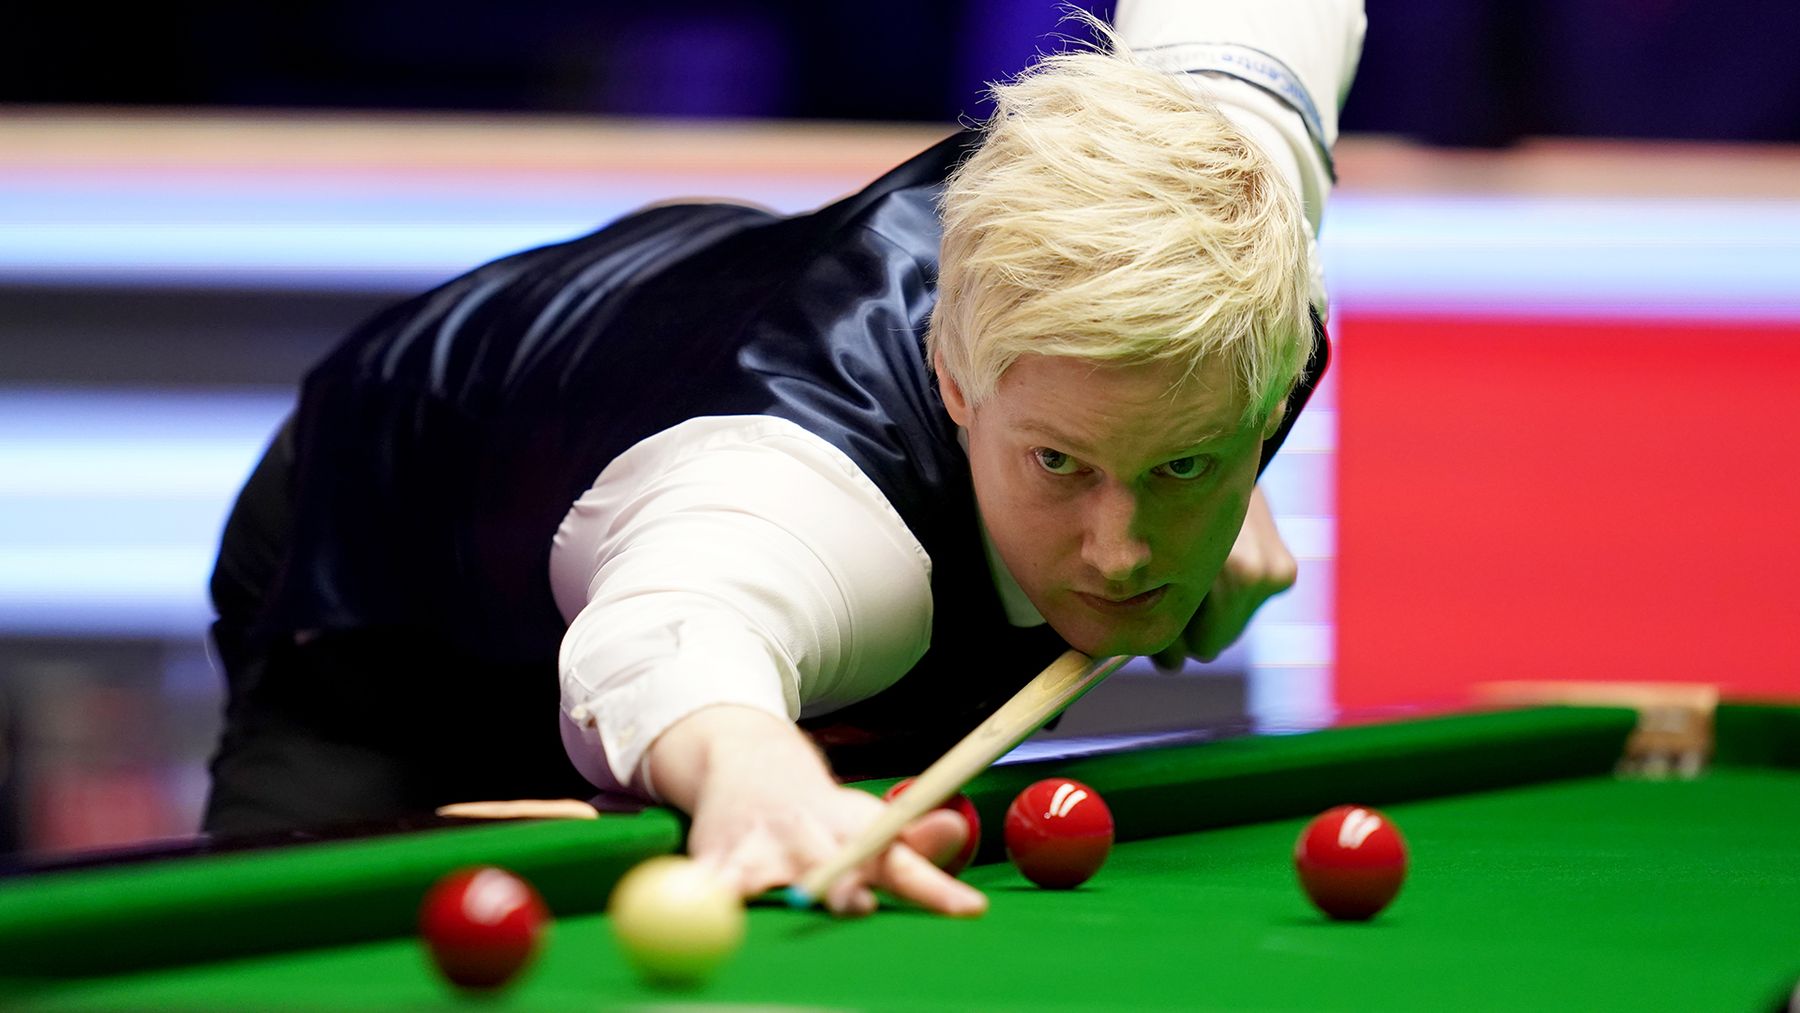 Neil Robertson brushes past Jack Lisowski at snookers Tour Championship